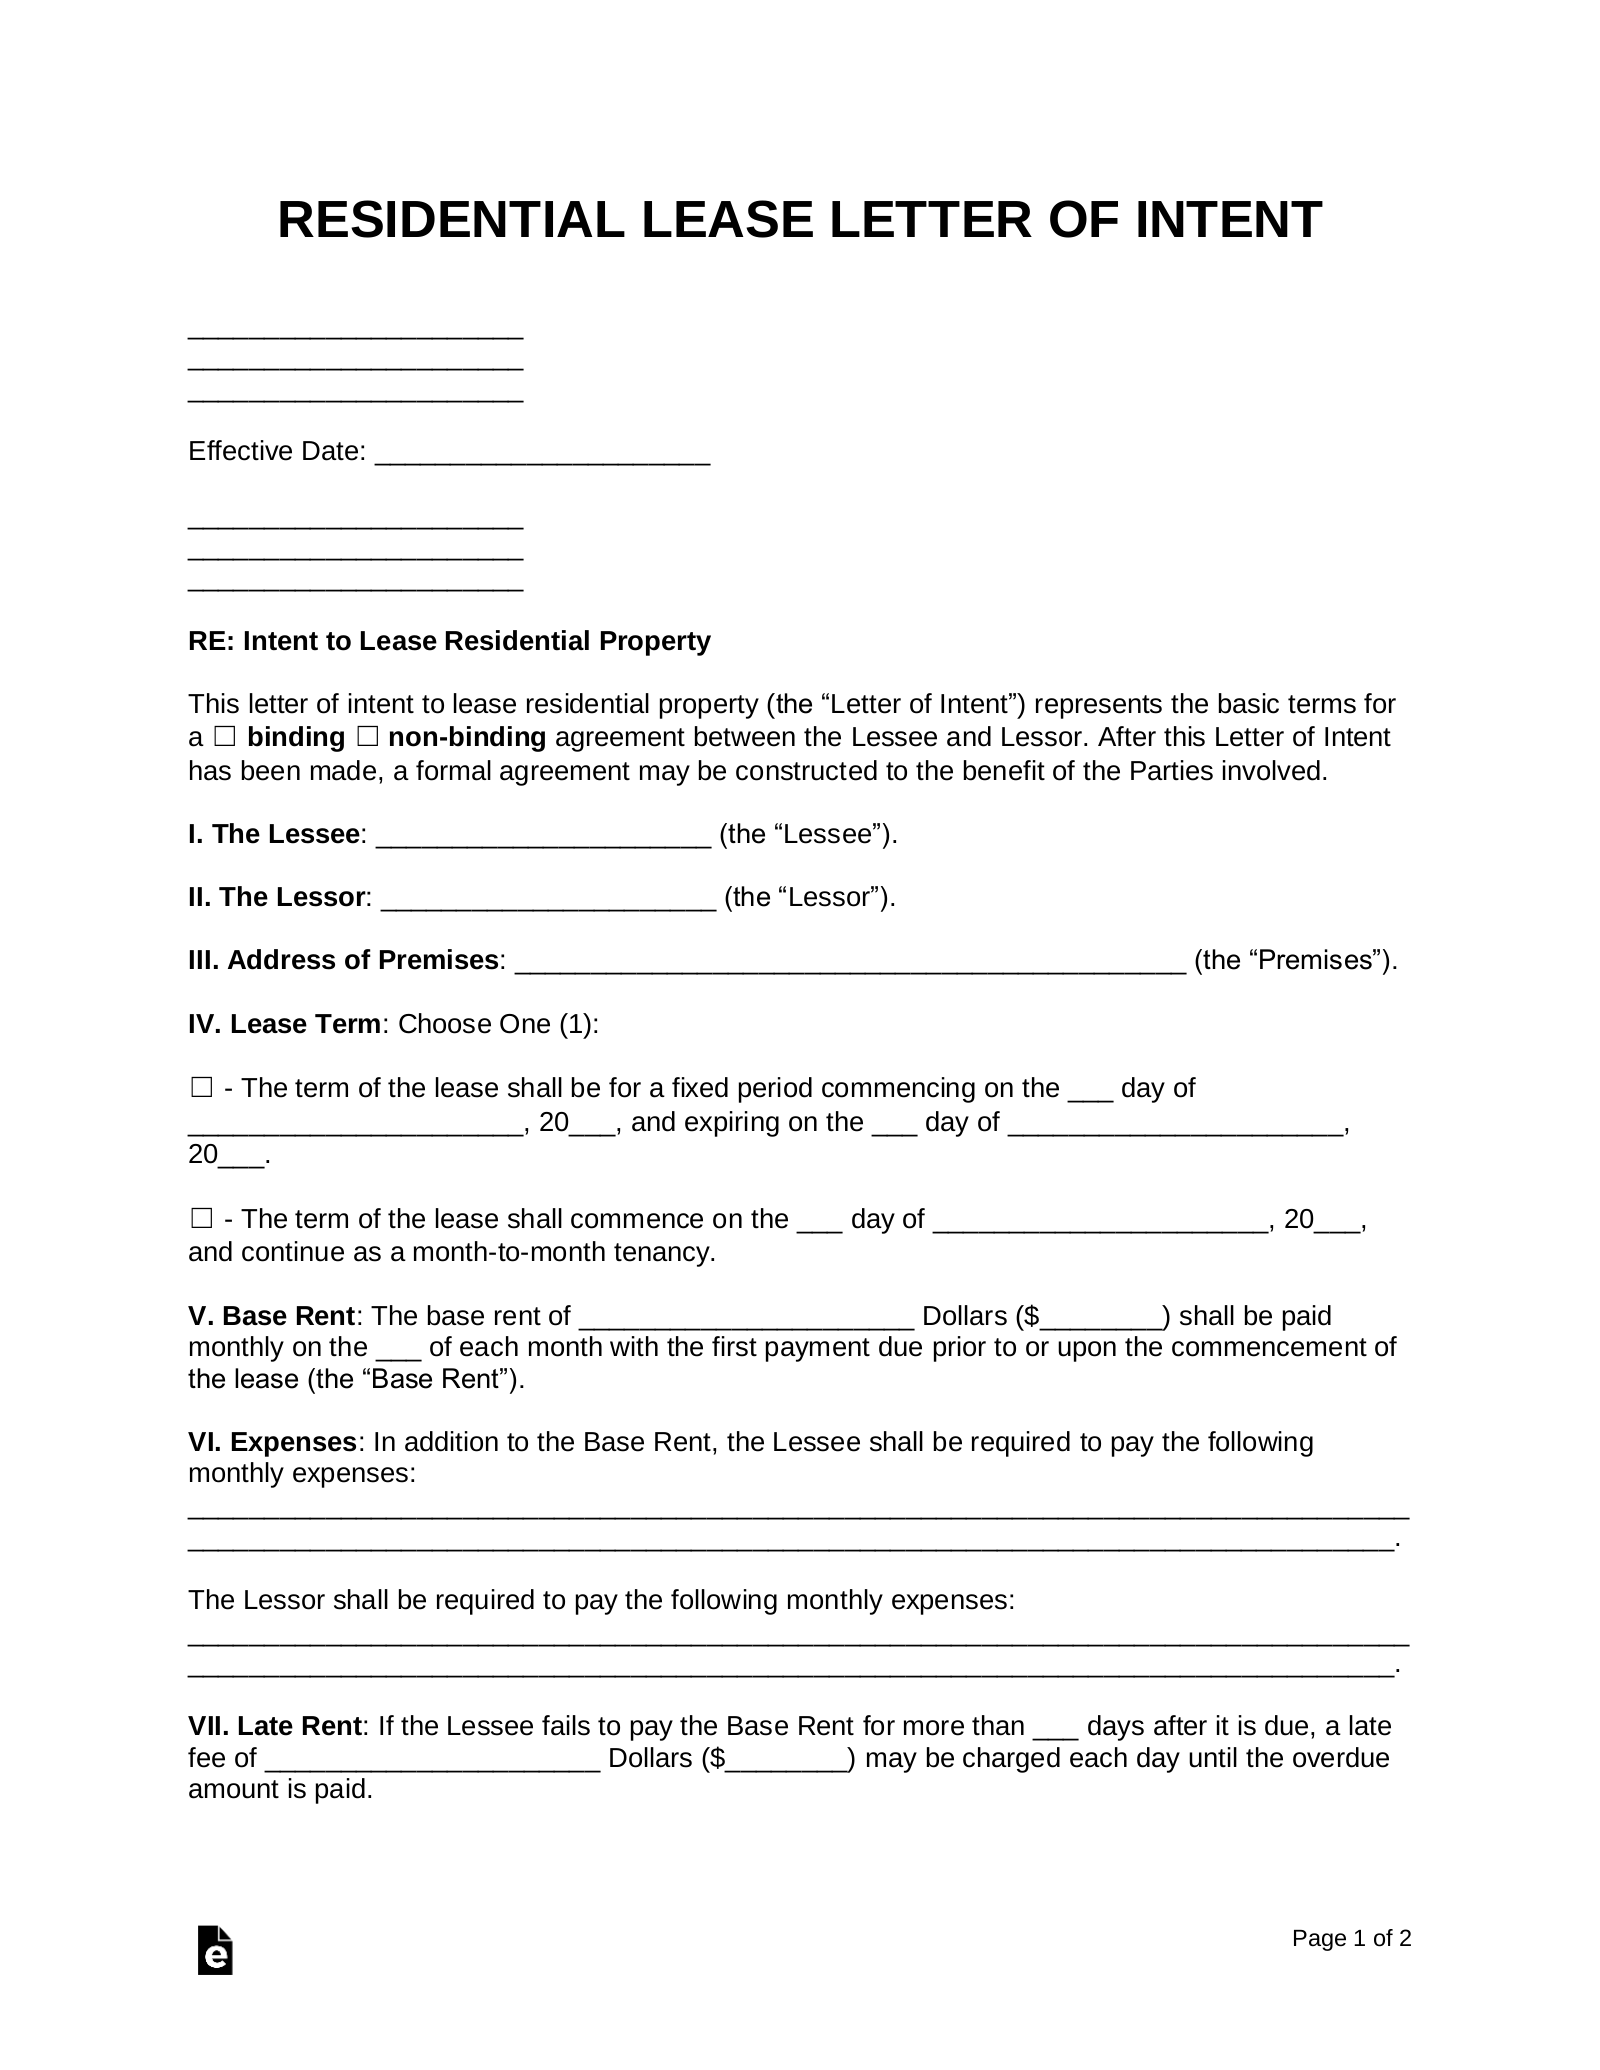 letter-of-intent-ending-for-your-needs-letter-template-collection